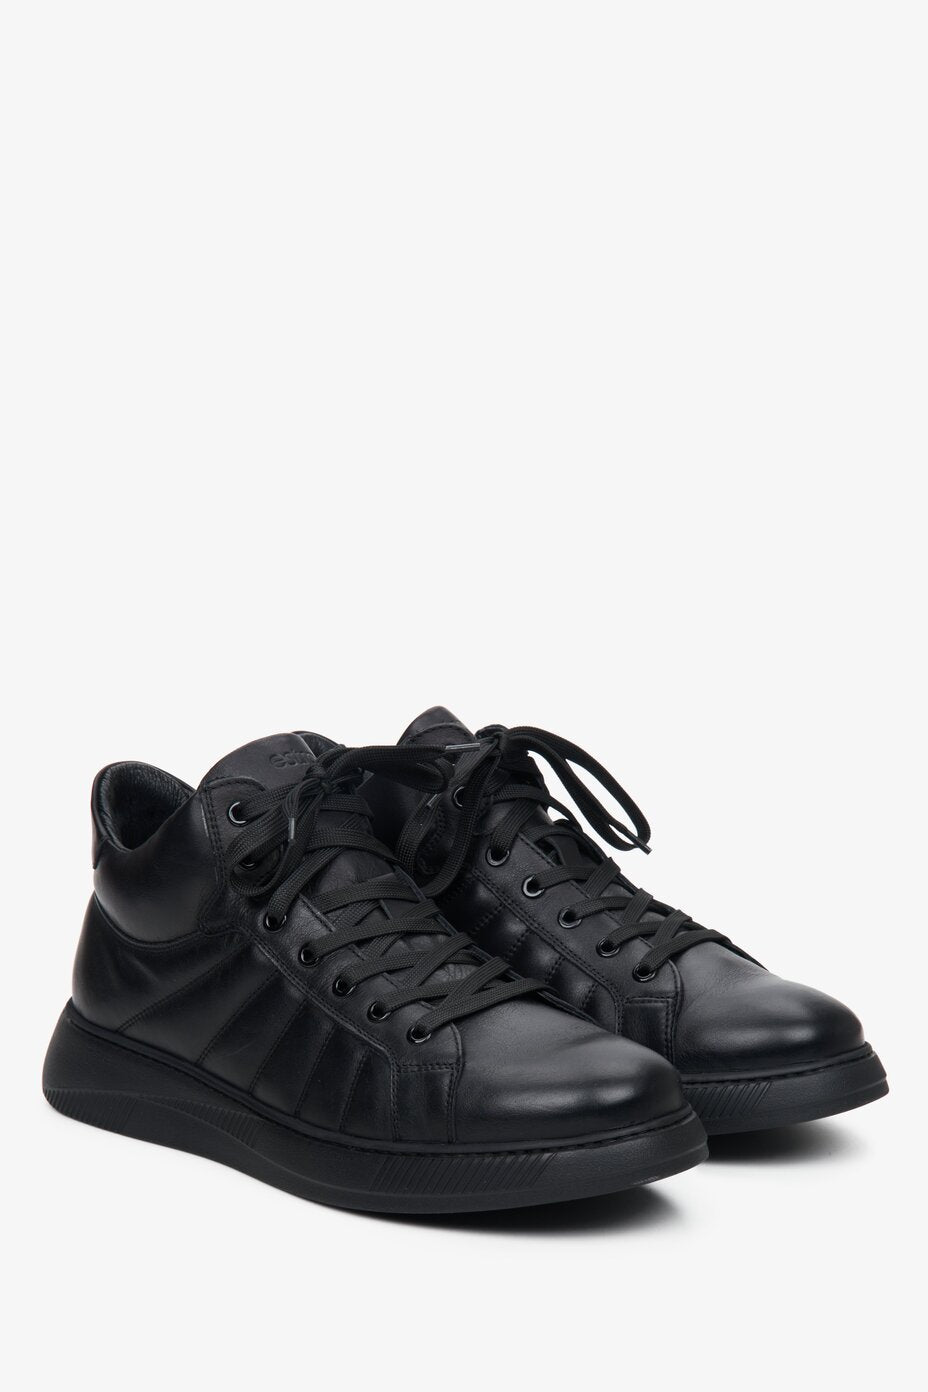 Estro high-top men's sneakers in black made of genuine leather.